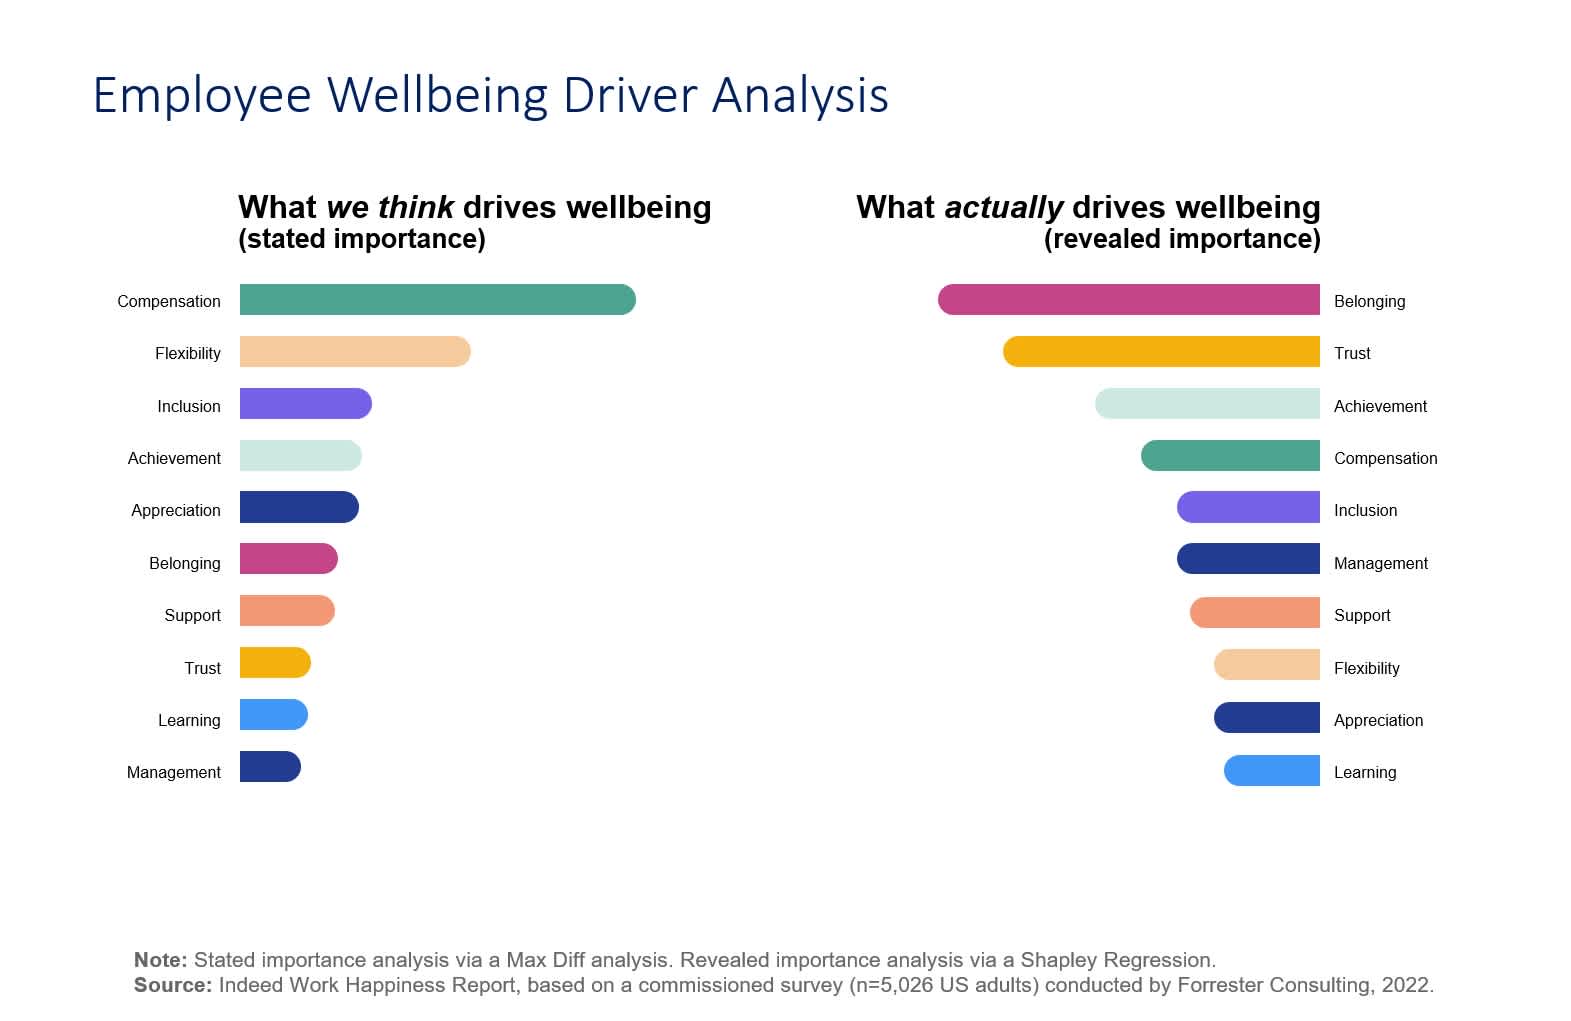 A chart showing that what we think drives work wellbeing and what actually drives work wellbeing among the eleven drivers are quite different